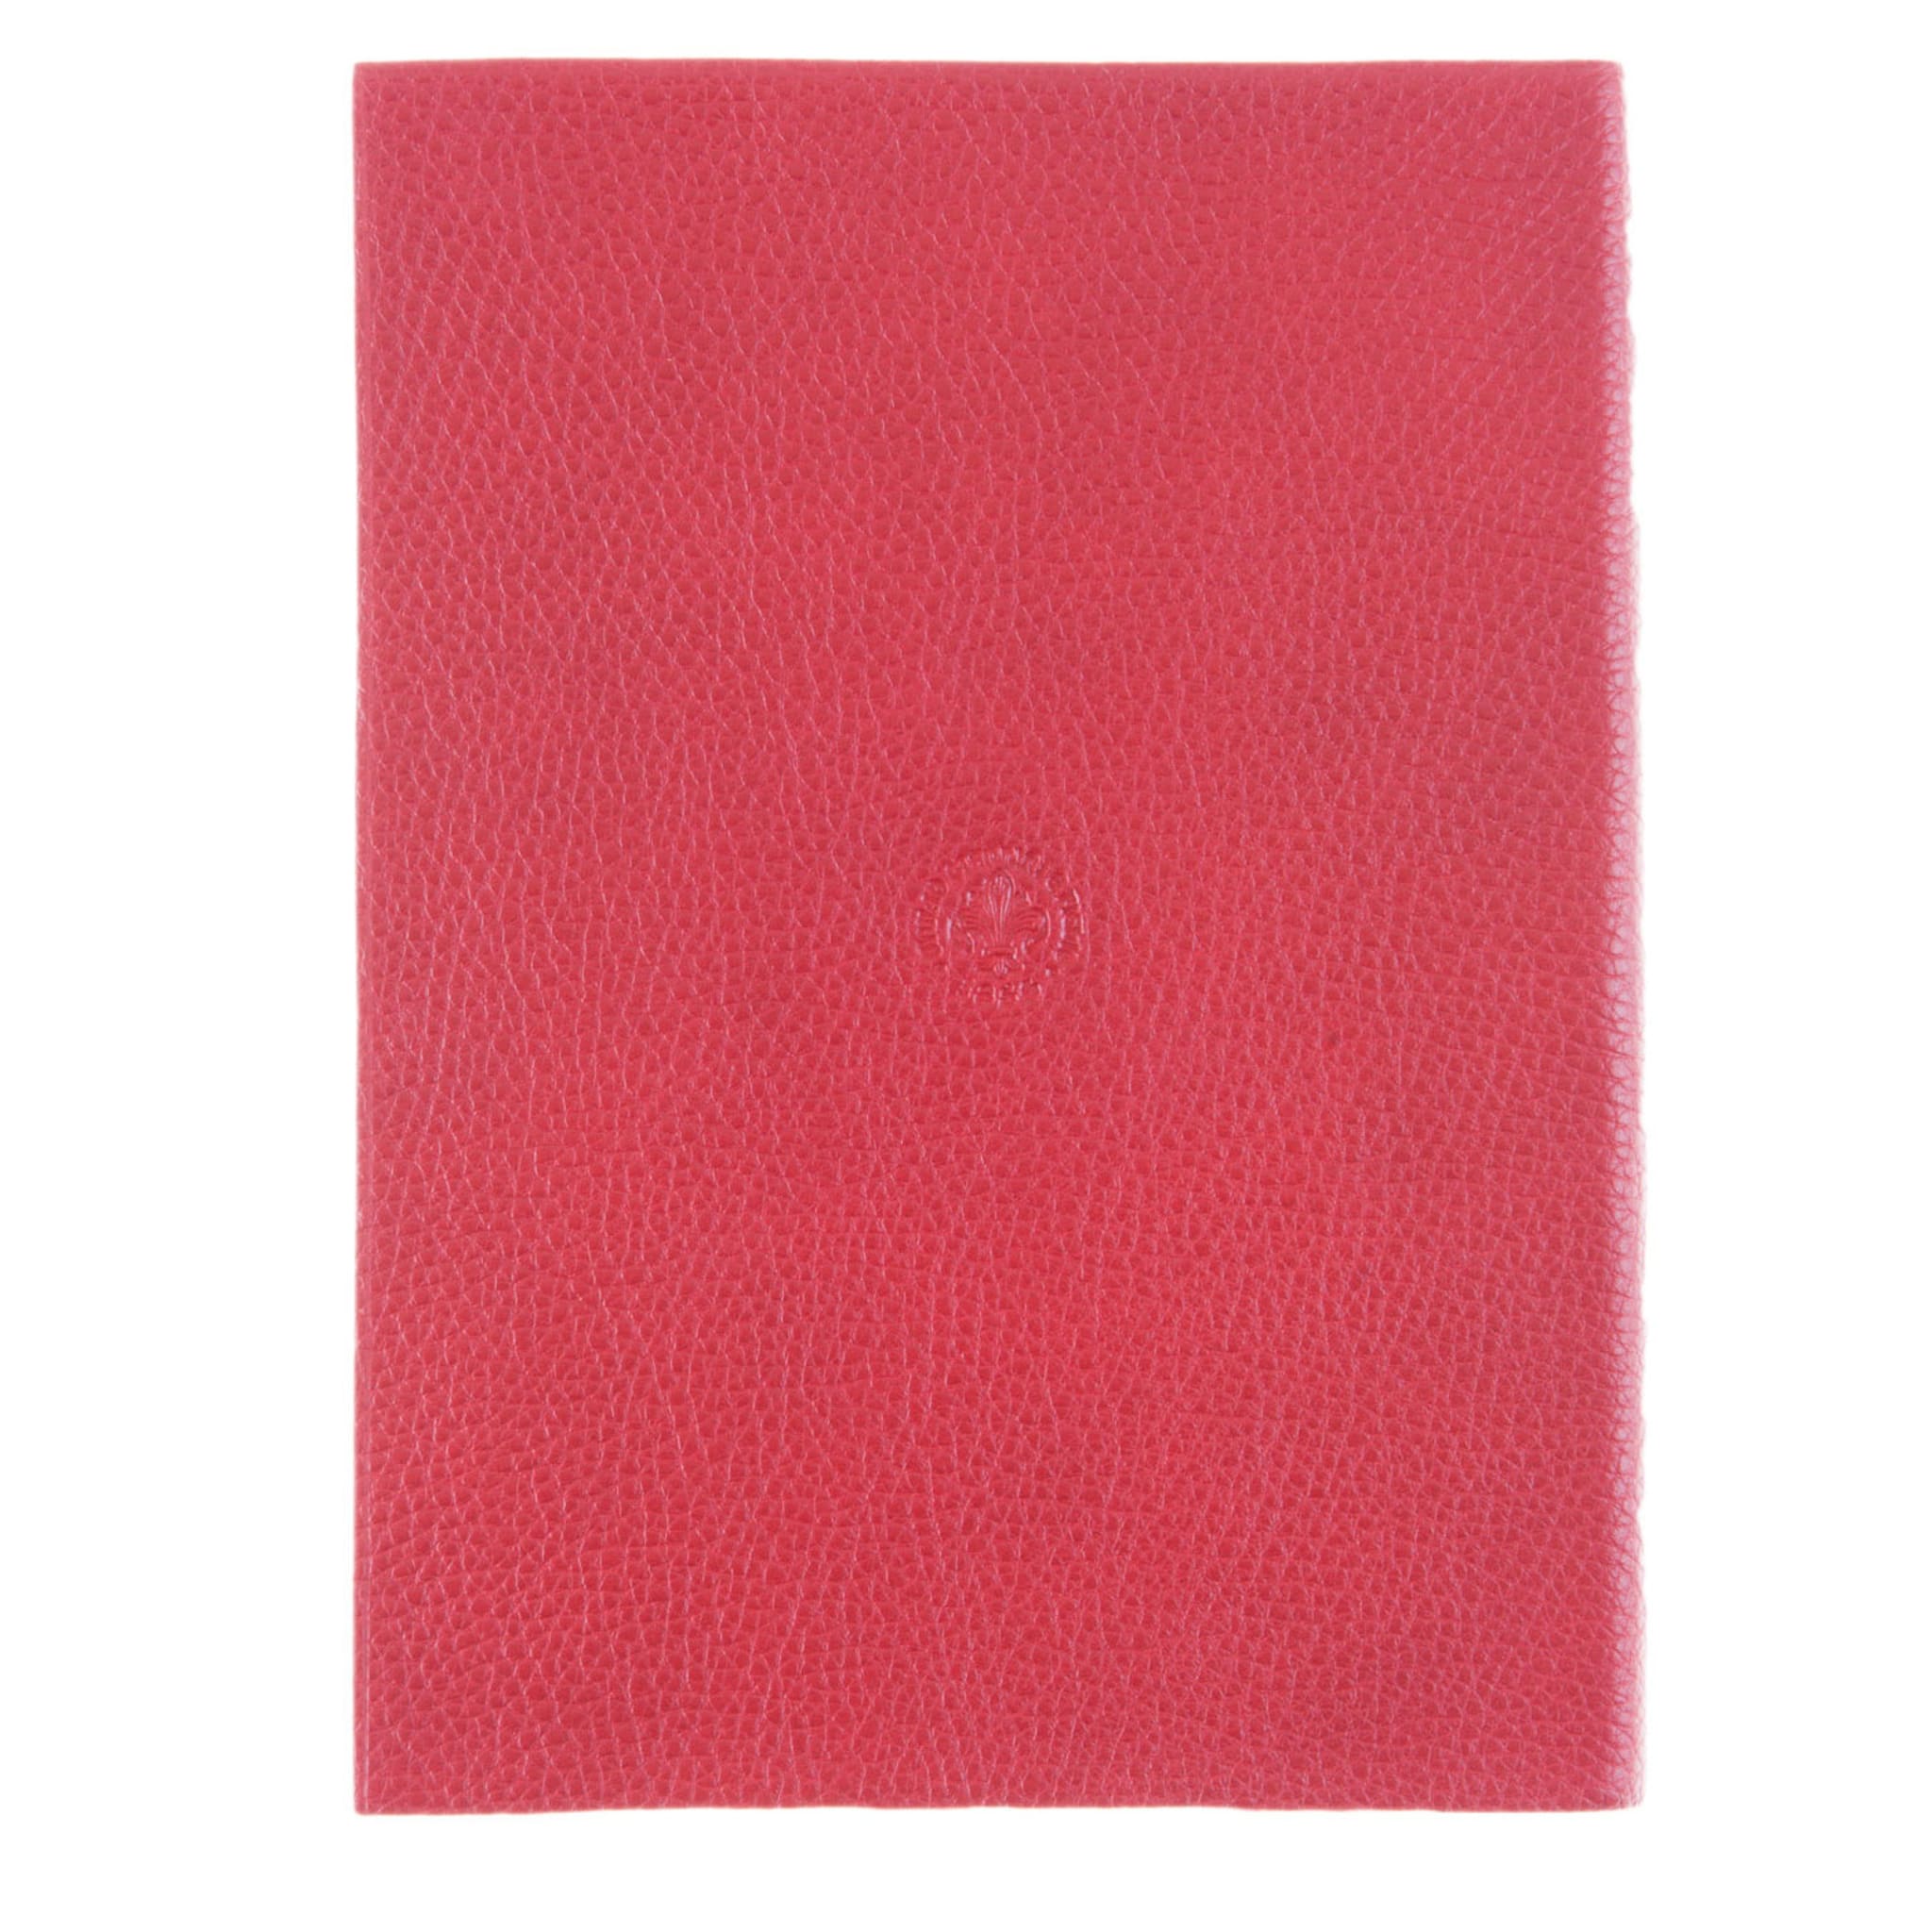 Red Leather Notebook - Alternative view 2